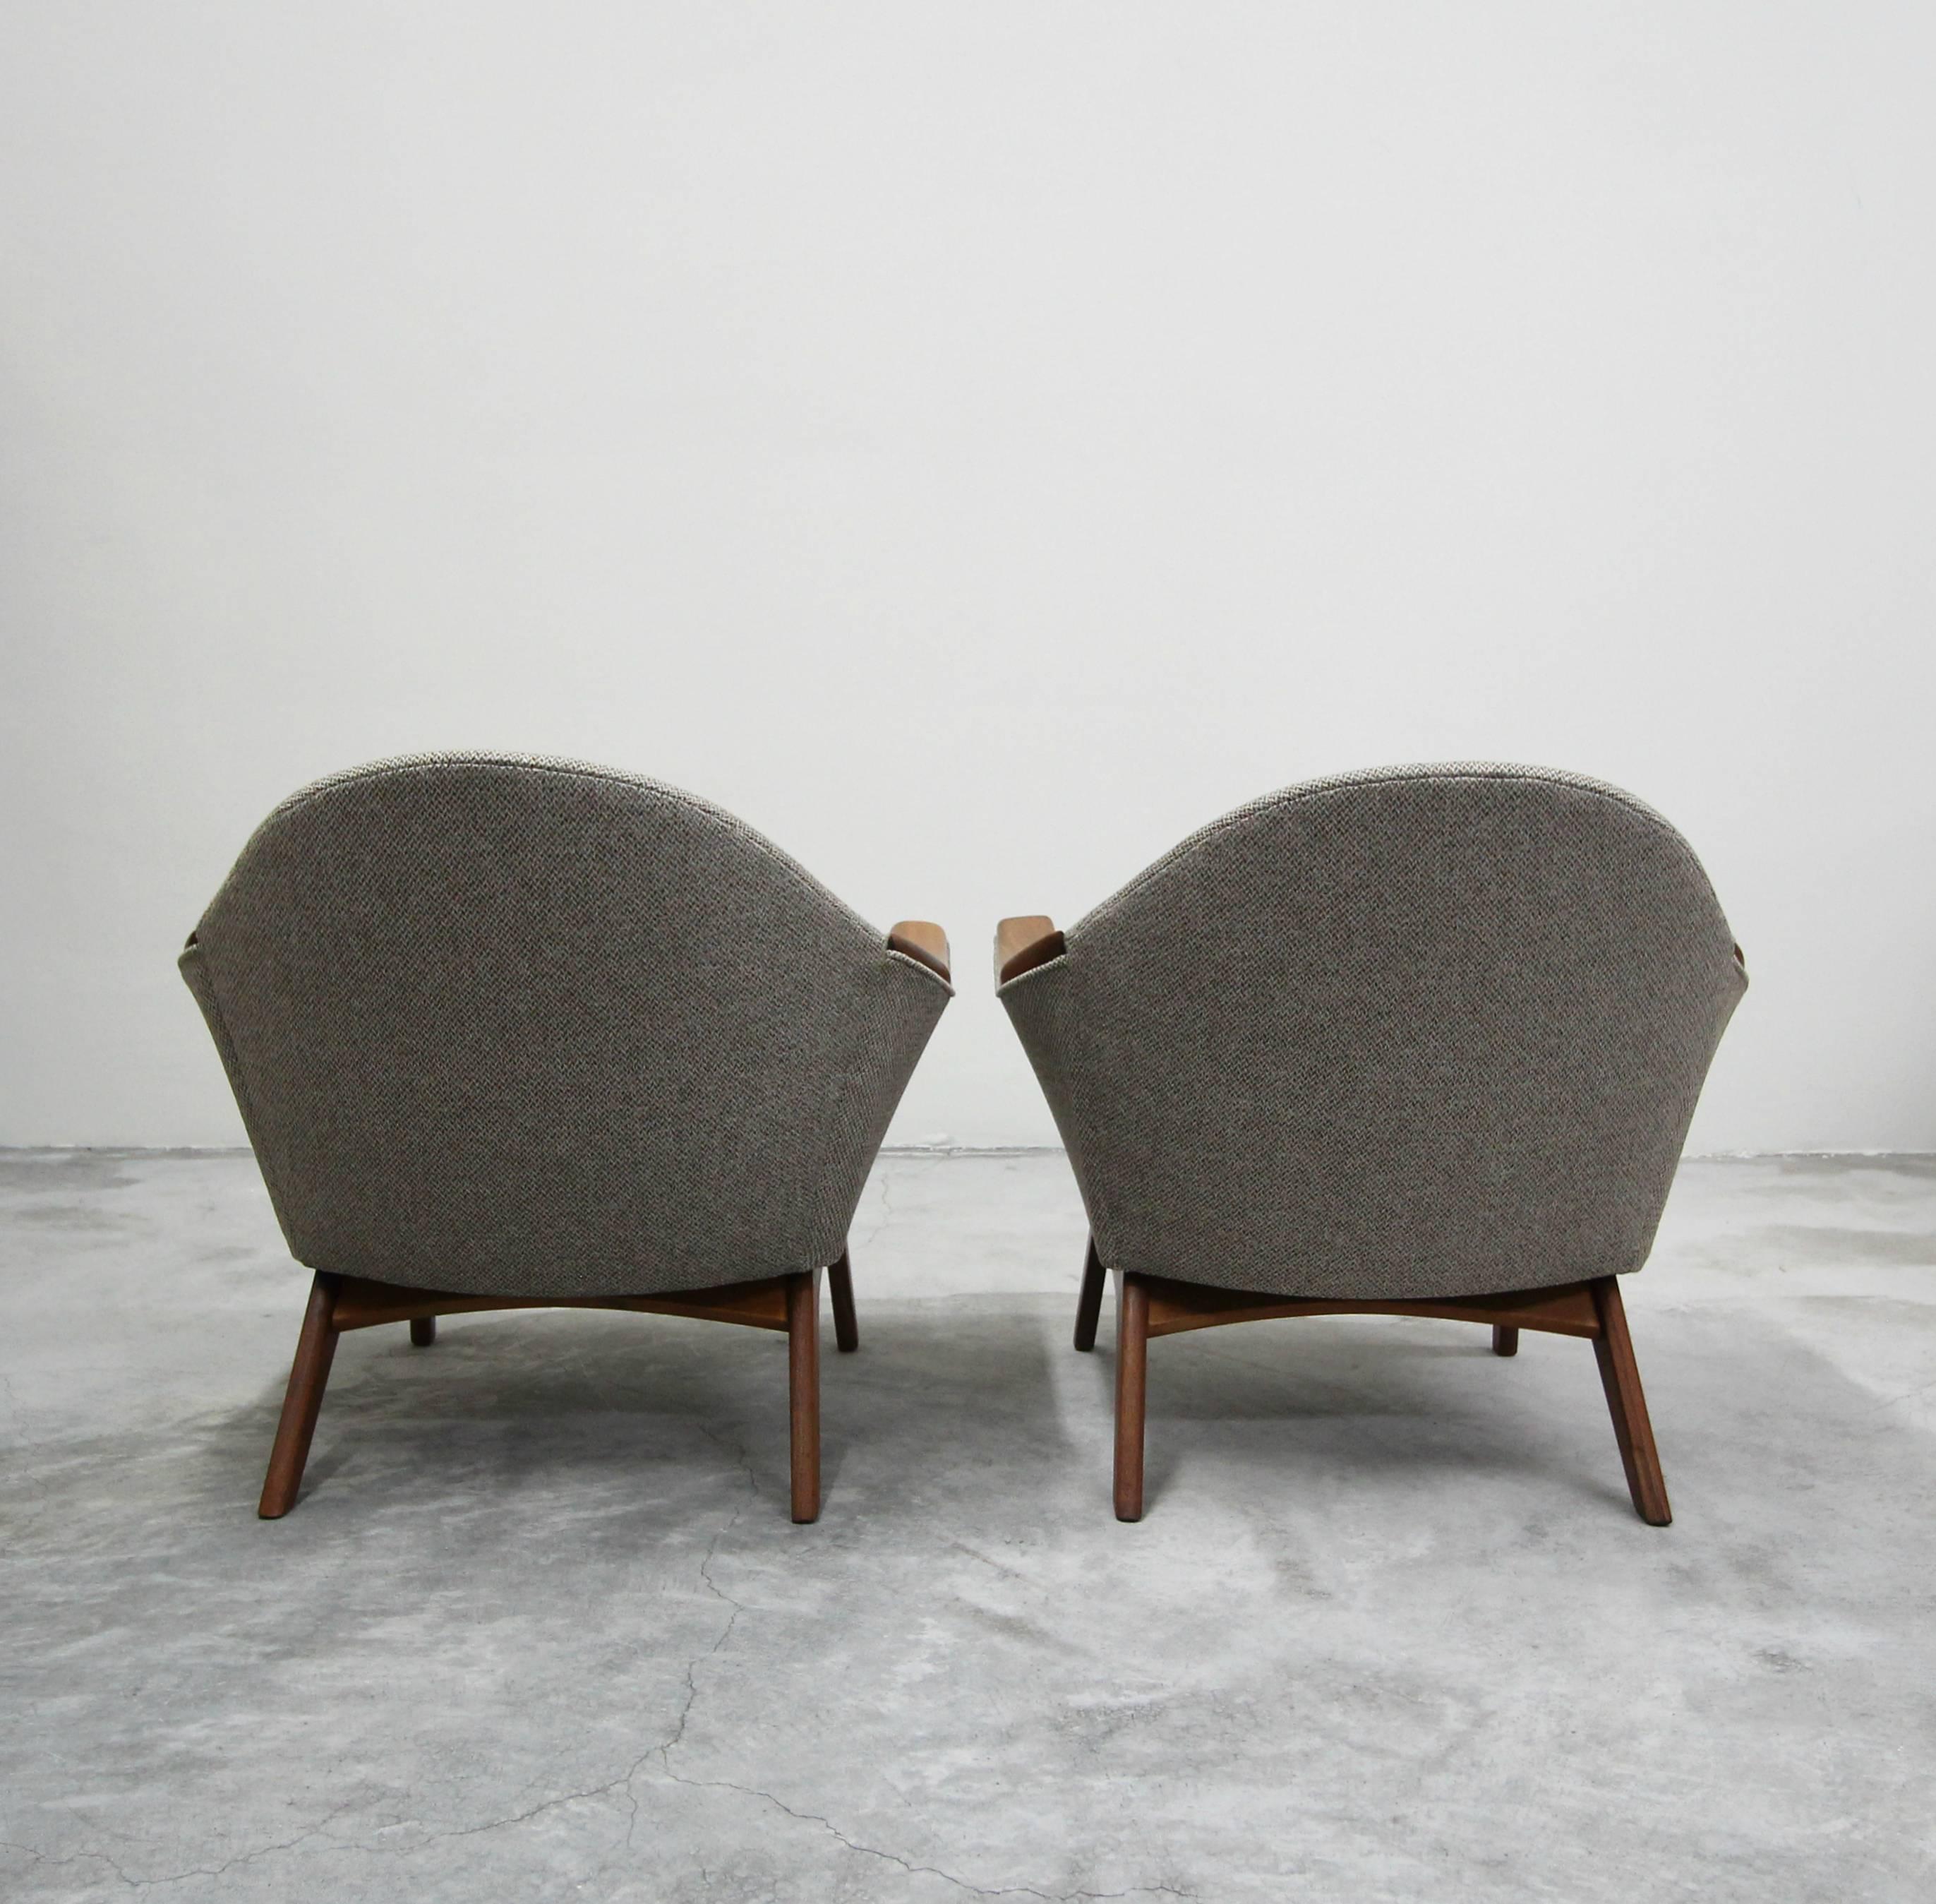 20th Century Pair of Midcentury Lounge Chairs by Adrian Pearsall for Craft Associates